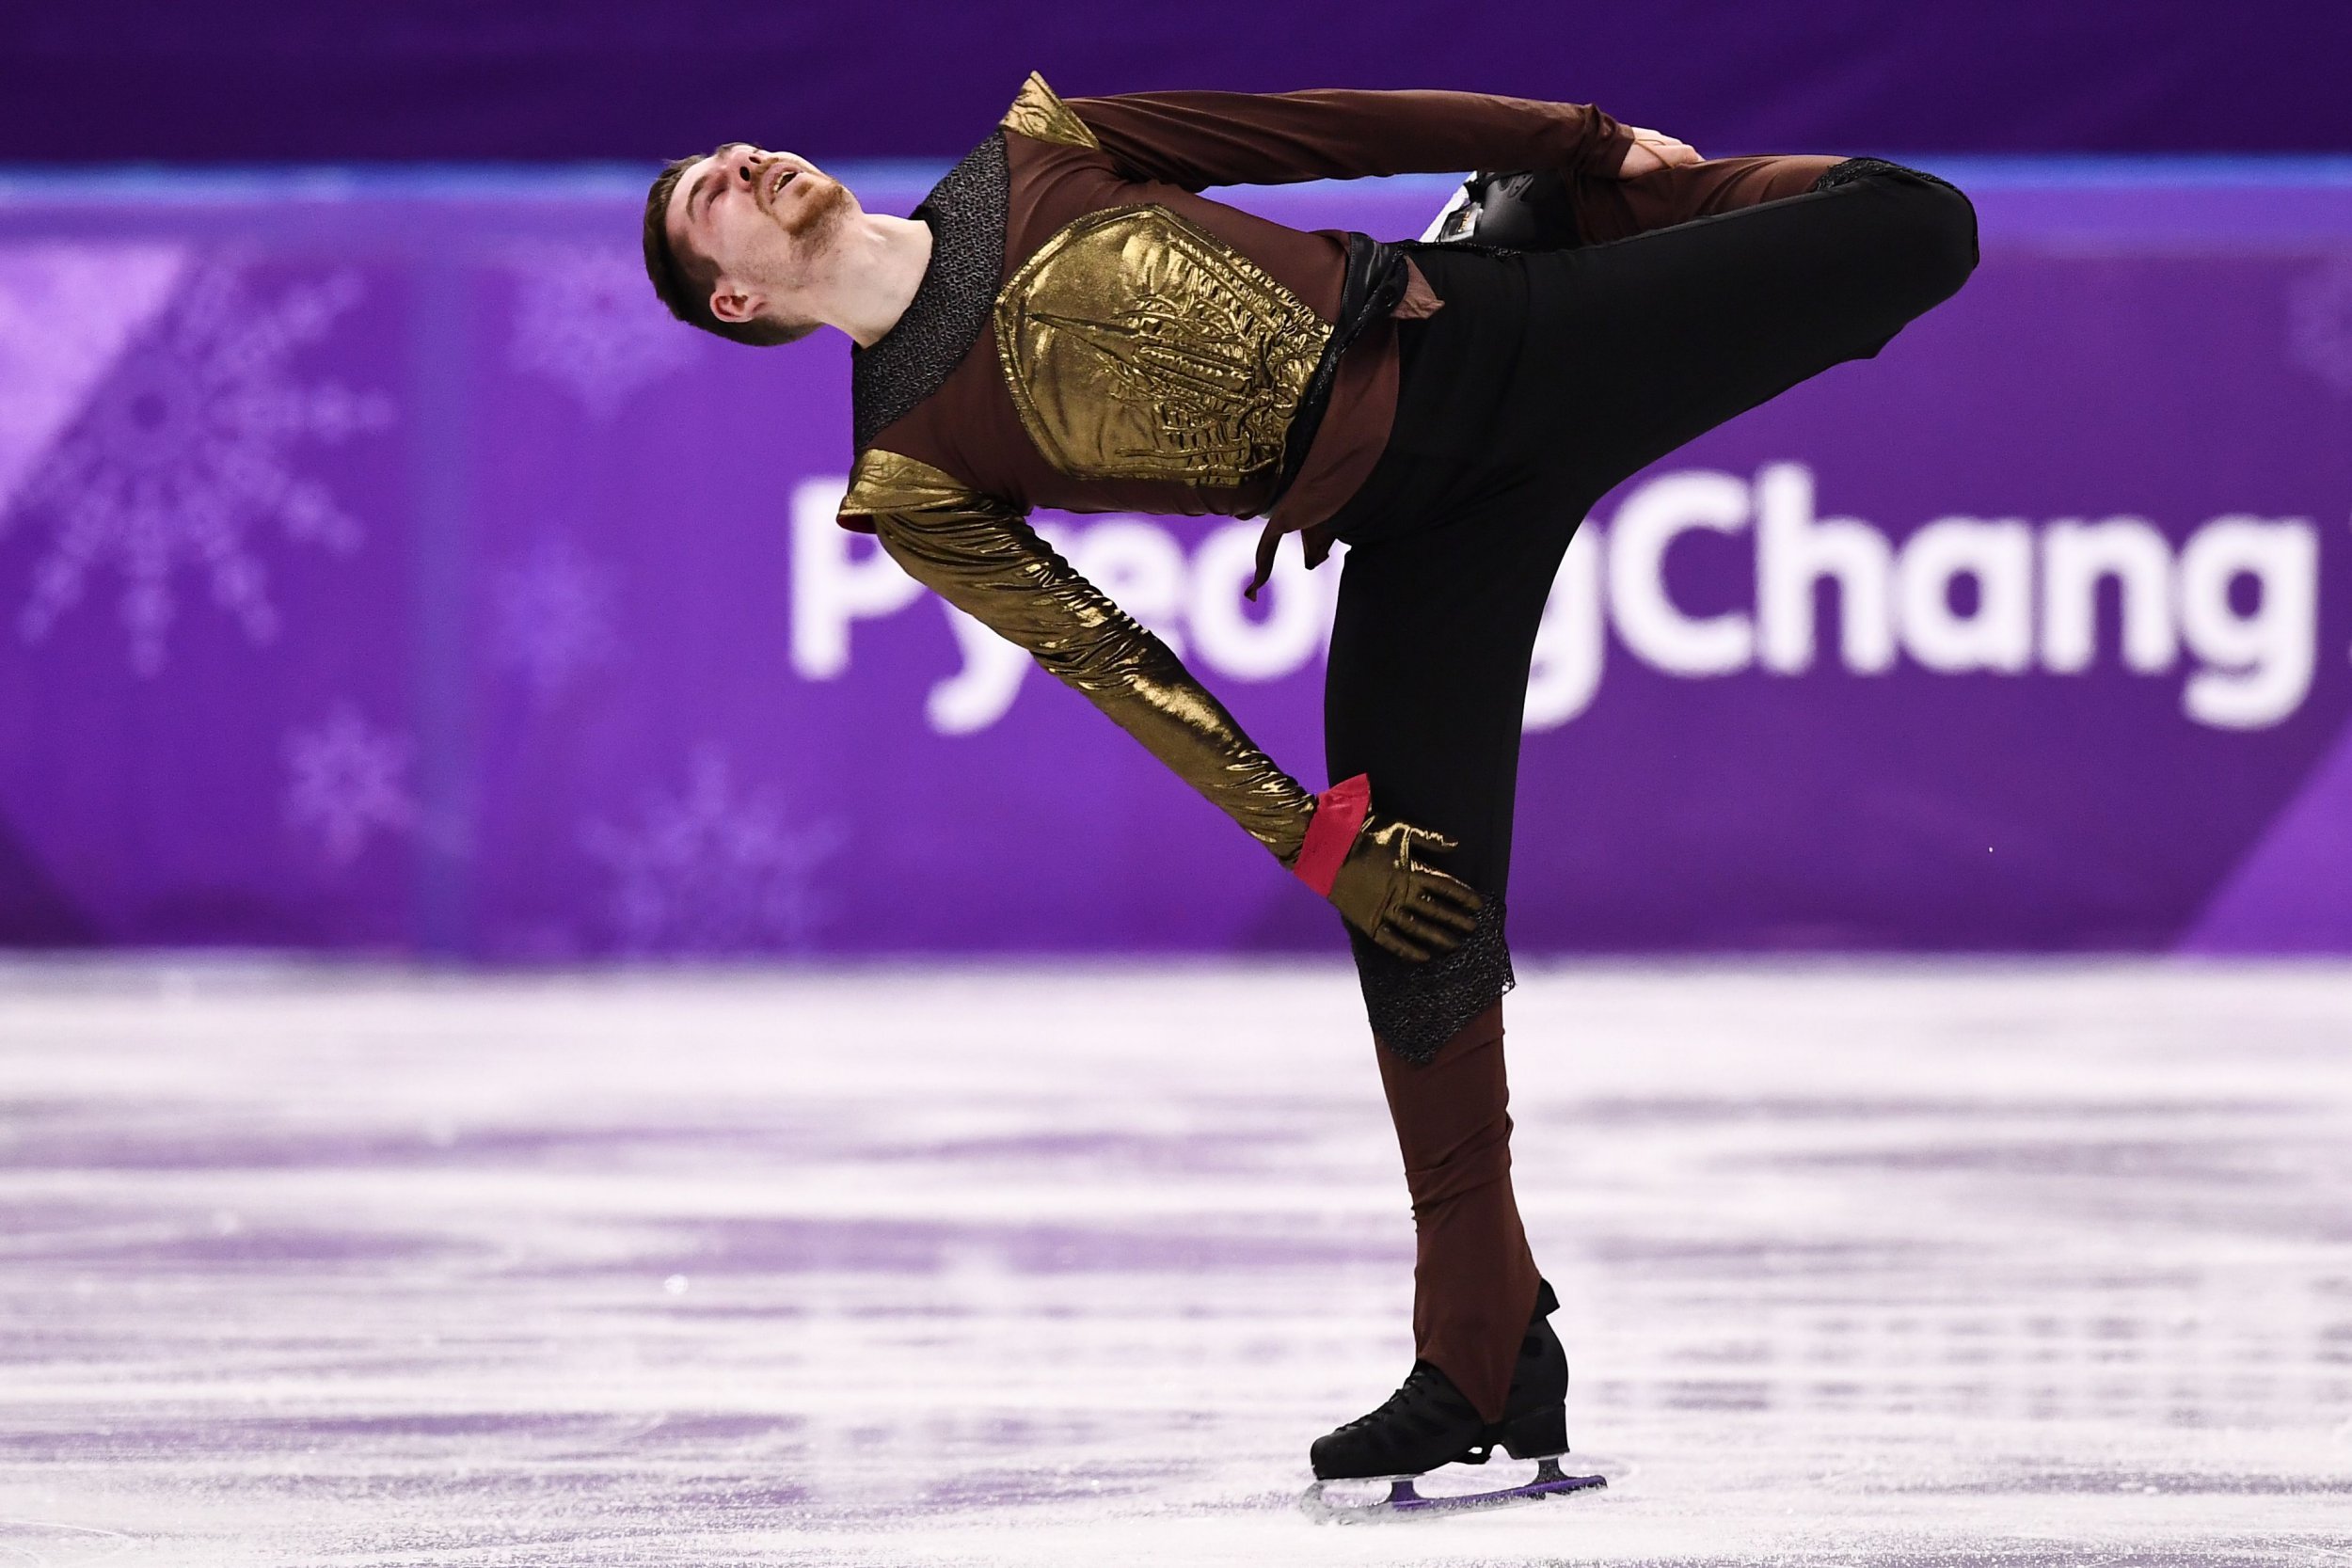 Olympic figure skater performed to Game Of Thrones music dressed as Jaime Lannister